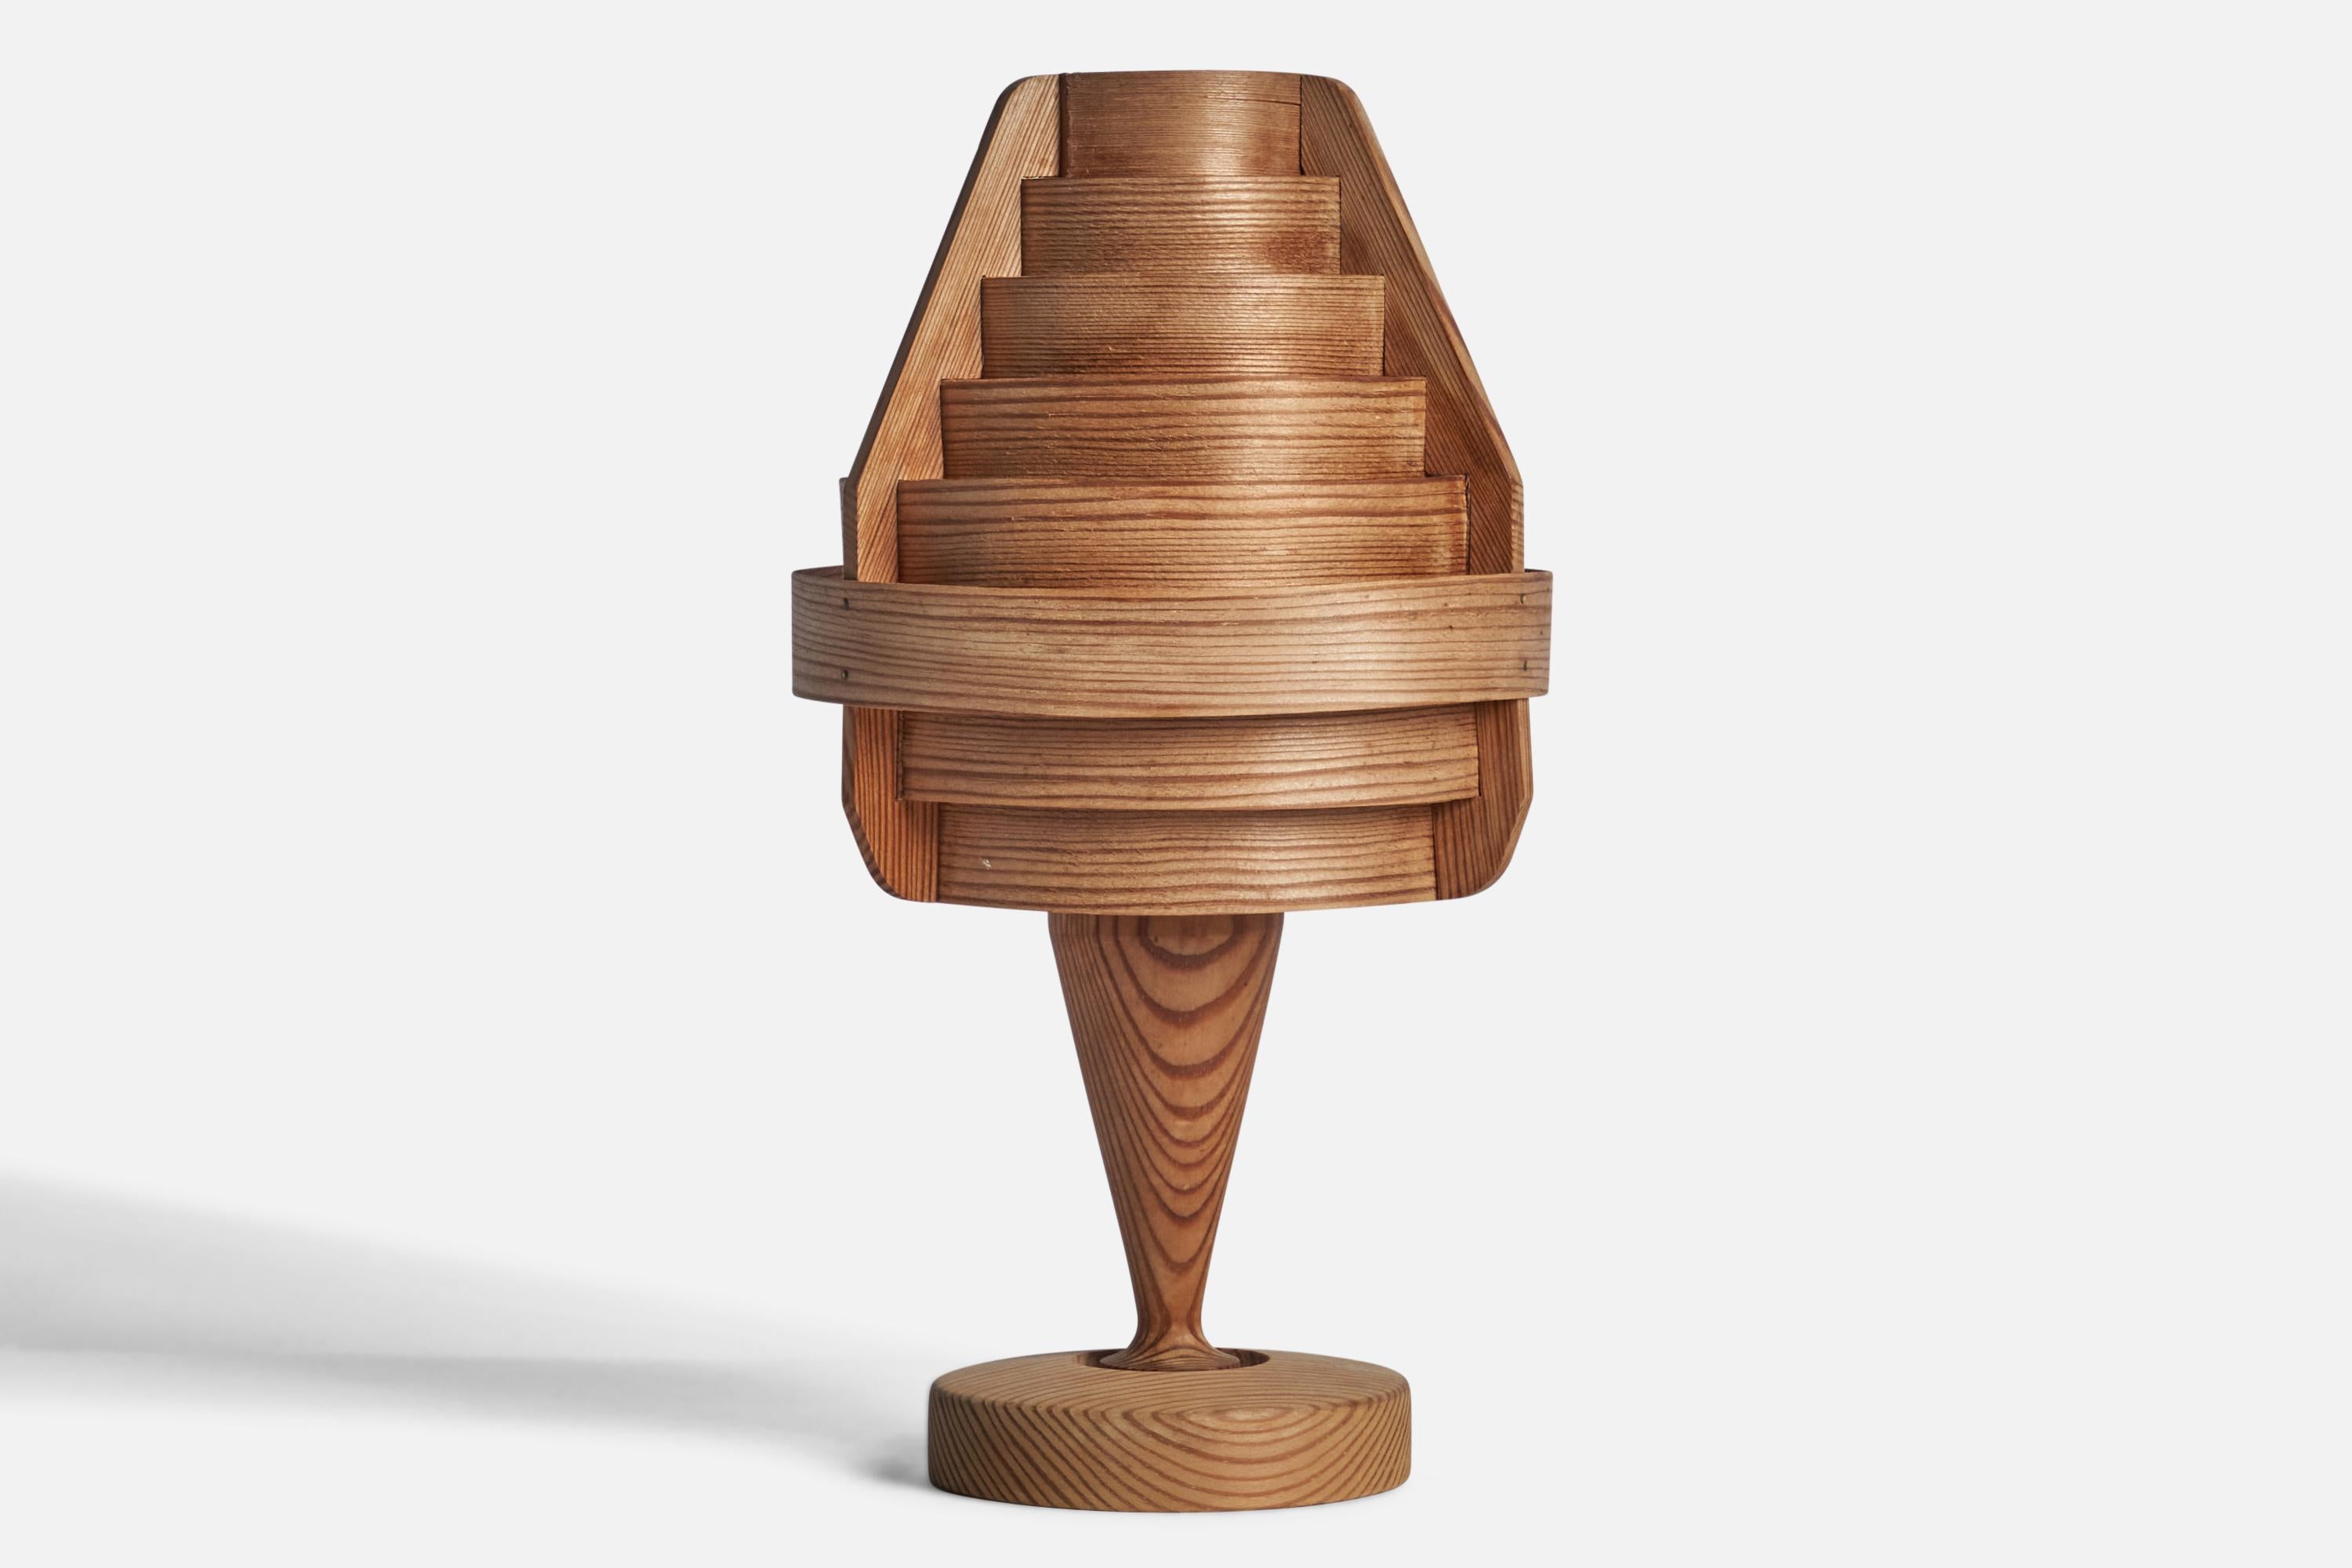 A pine and moulded pine veneer table lamp designed and produced by Hans-Agne Jakobssen, Sweden, 1970s.

Overall Dimensions (inches): 12” H x 6.25” Diameter
Bulb Specifications: E-14 Bulb
Number of Sockets: 1
All lighting will be converted for US